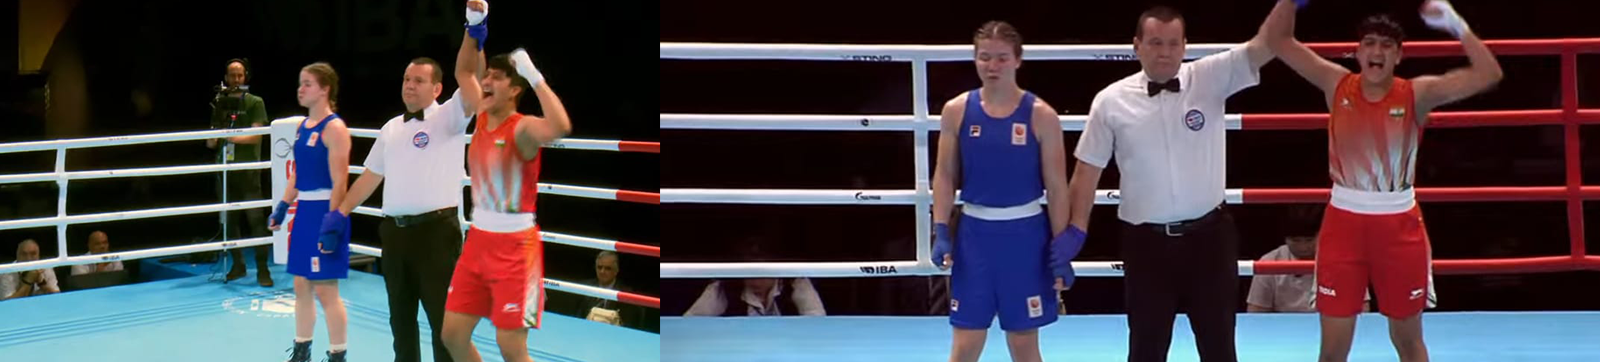 Ravina from GGSCW, Sector 26, Wins Gold in Youth World Boxing Championship